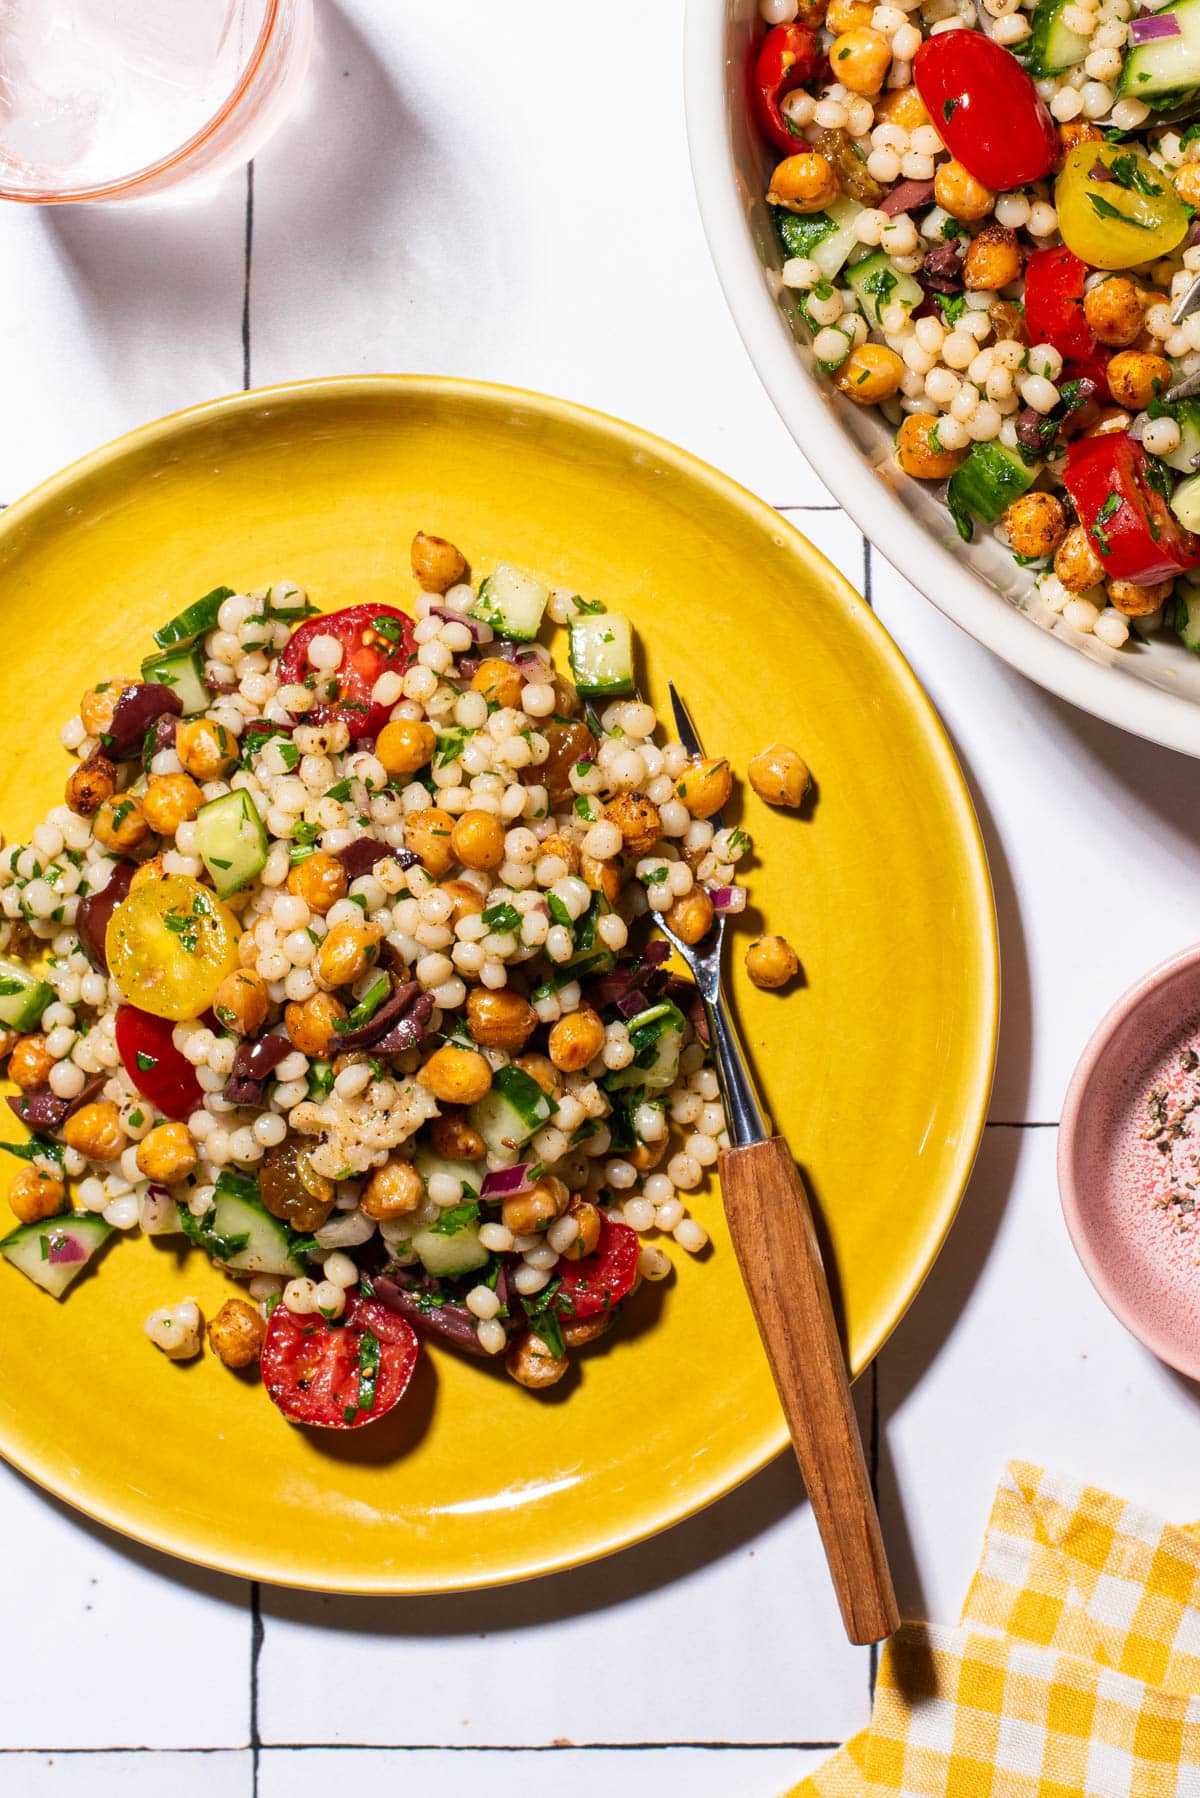 Summer pearl couscous salad with crispy chickpeas on a yellow plate.